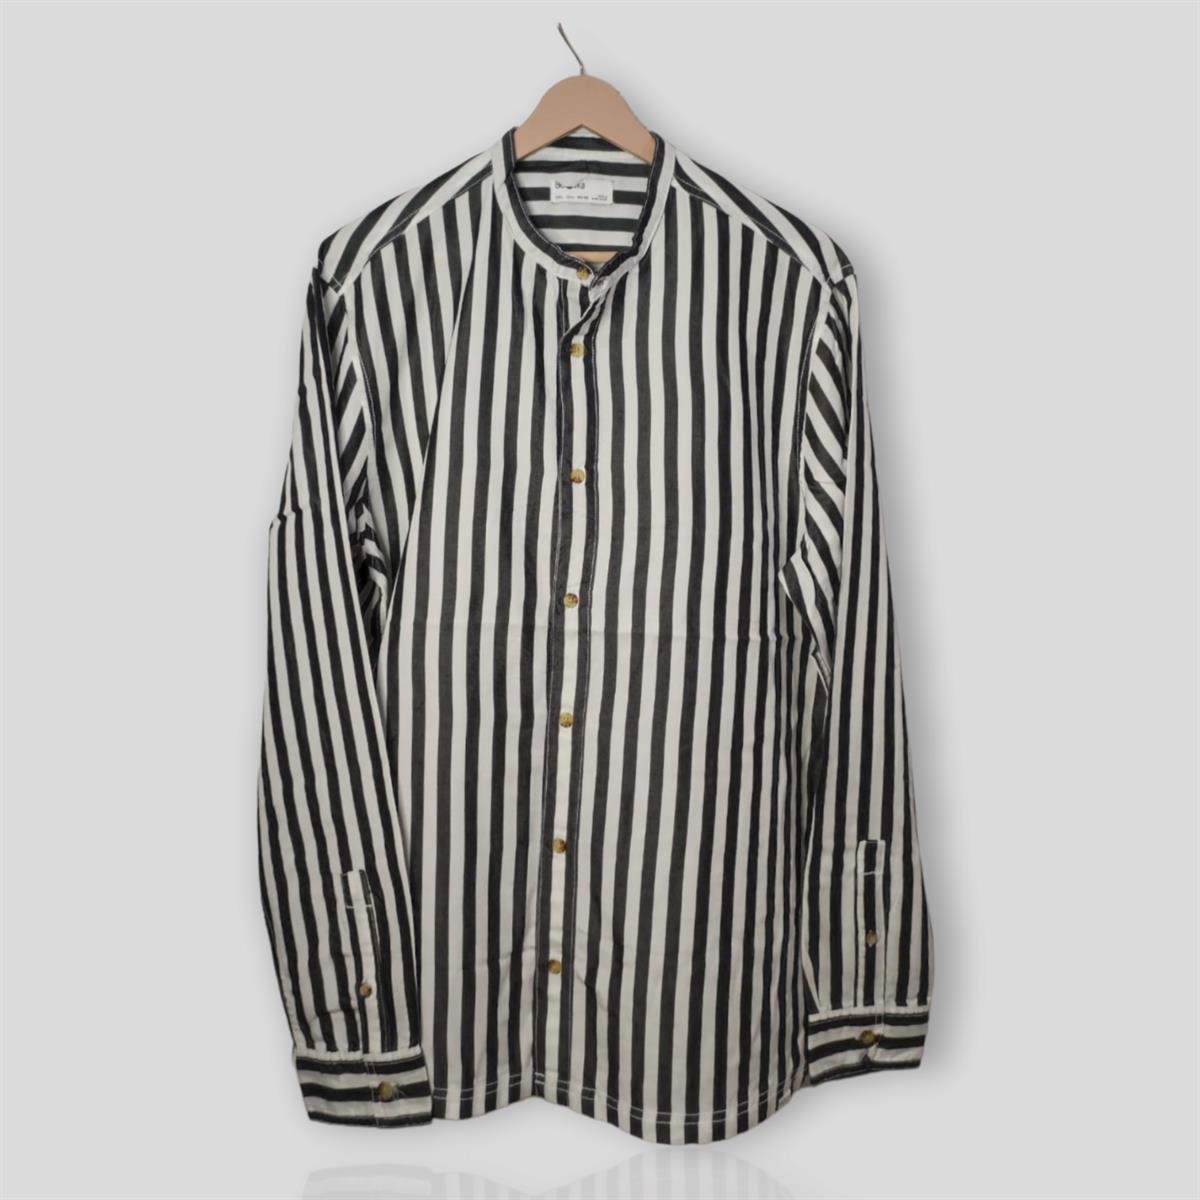 Imported Premium Quality Shirt Stripes Style